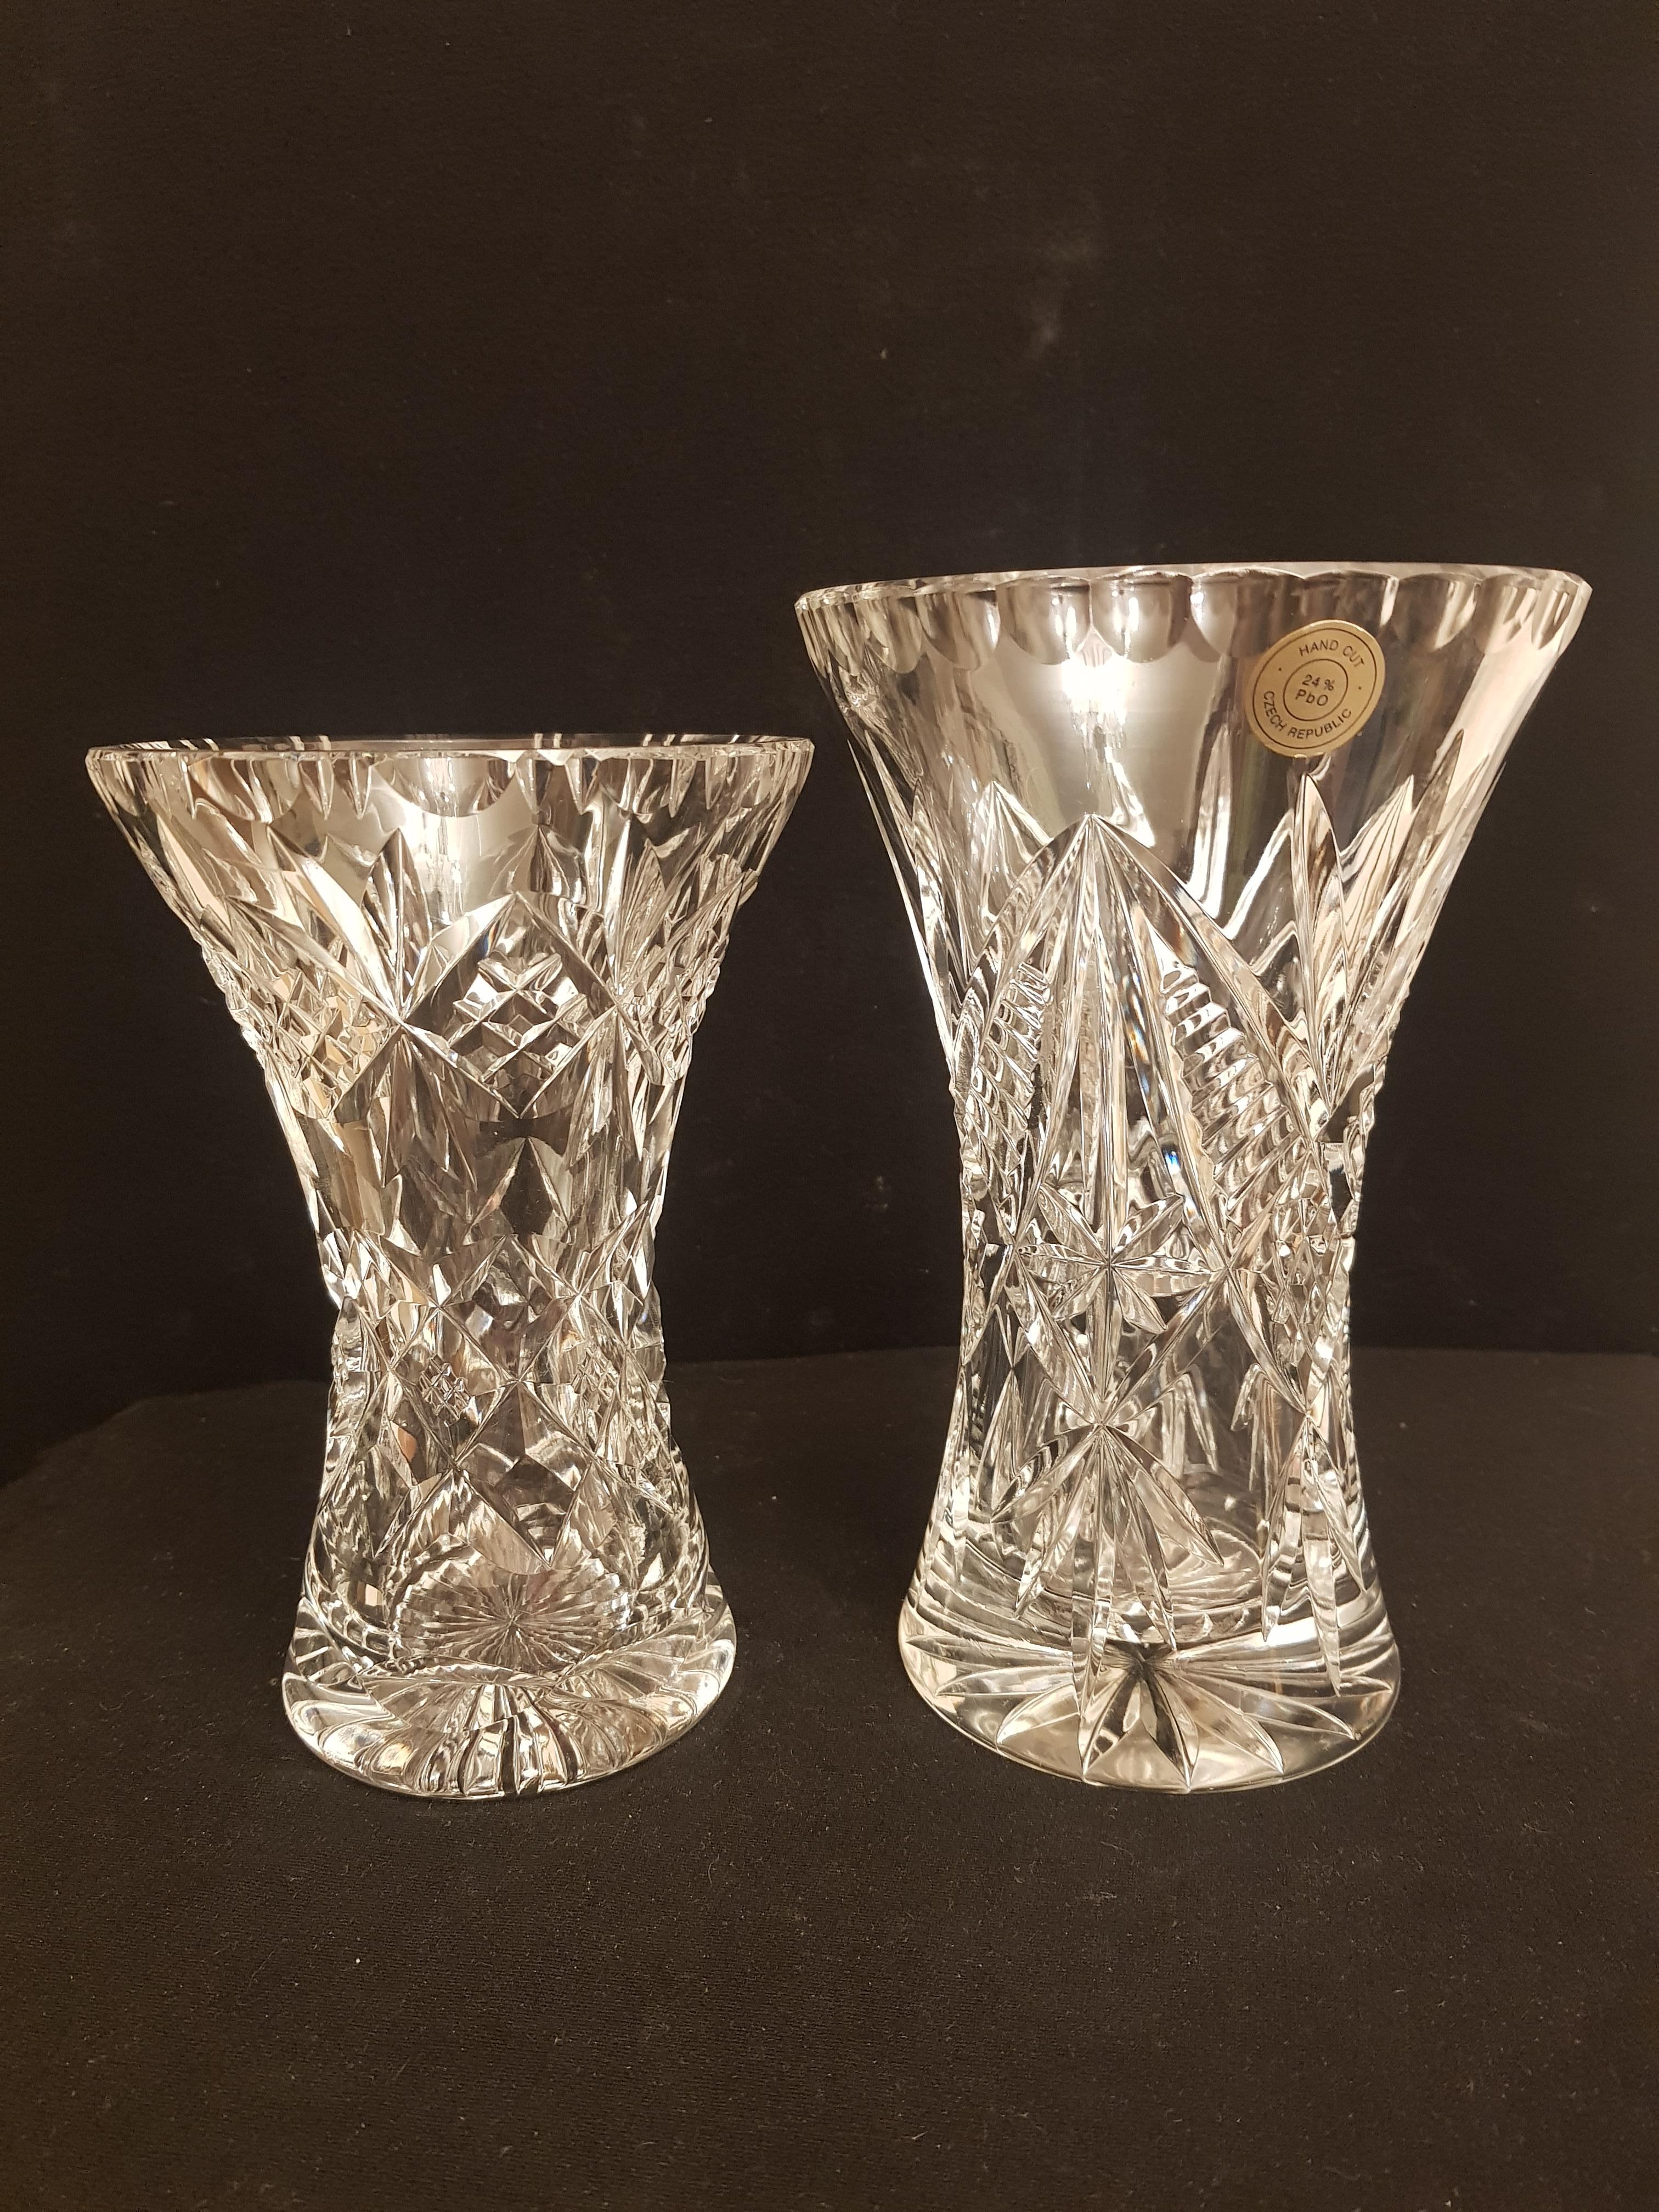 Beautiful vitange Bohemian hand cut crystal vases set of 2 pieces high quality crystal brilliant condition.